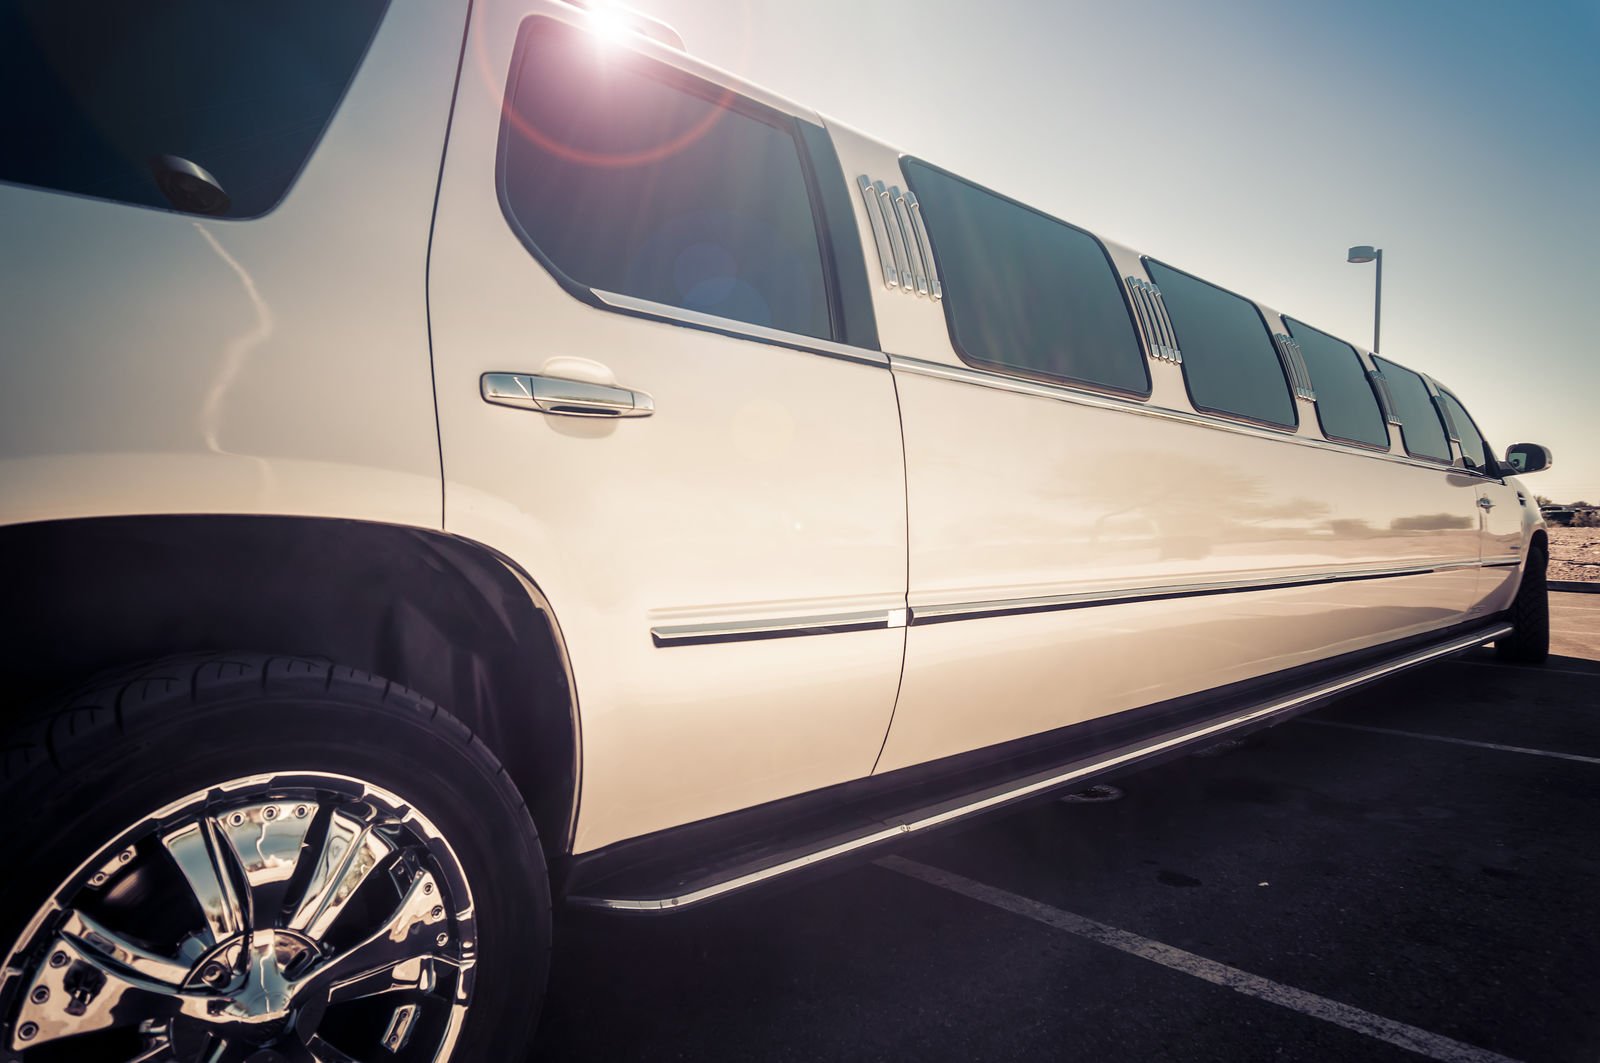 How do I find the best limousine auto insurance?